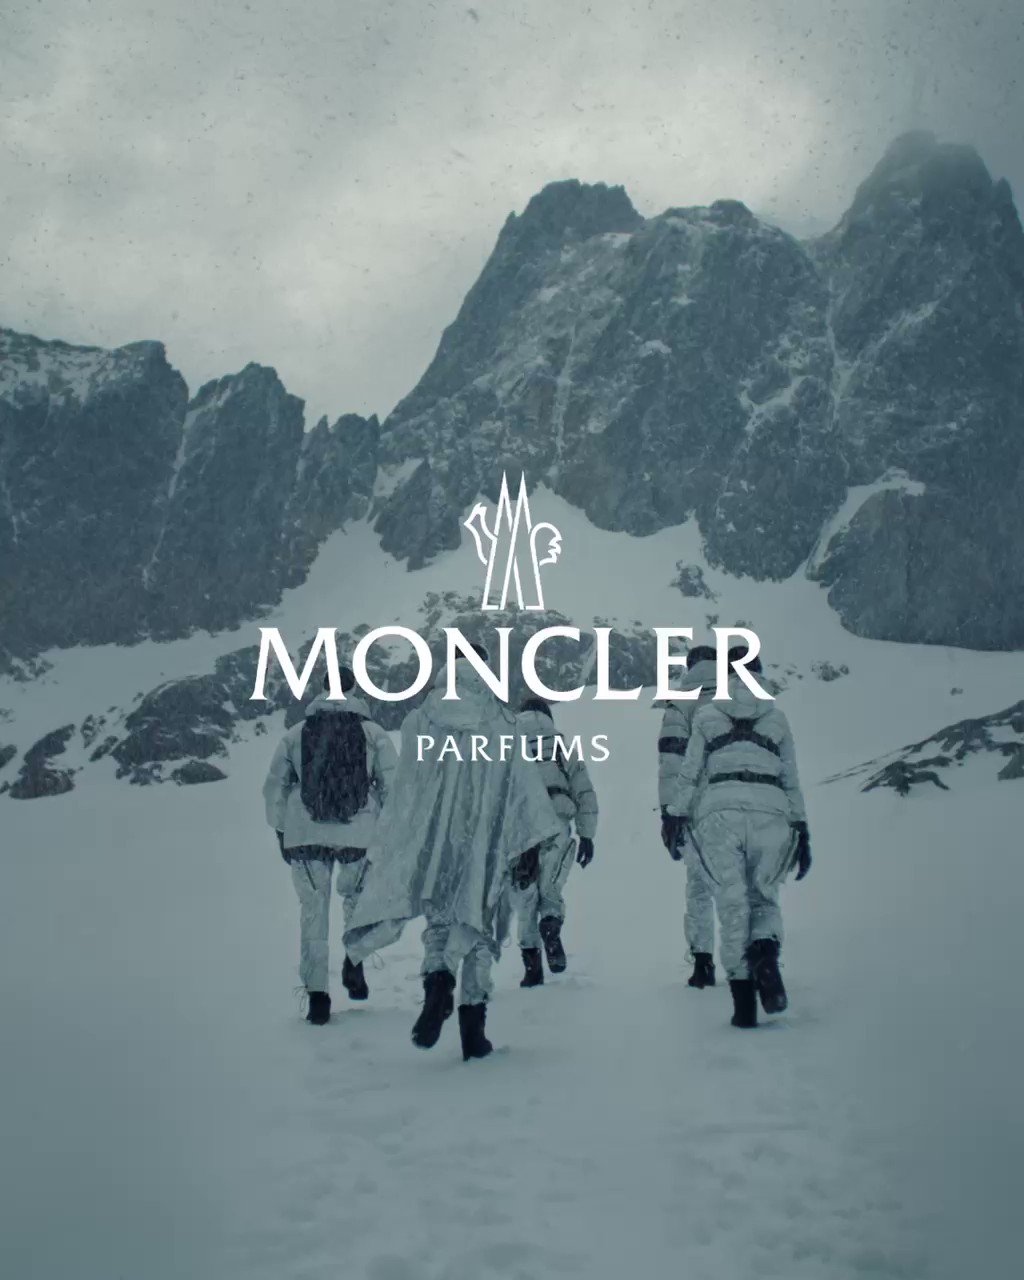 Moncler on X: The essence of adventure, bottled. #MonclerParfums take  intrepid explorers on an expedition of the senses. Discover the outer  reaches with two debut fragrances: Moncler Pour Femme and Moncler Pour